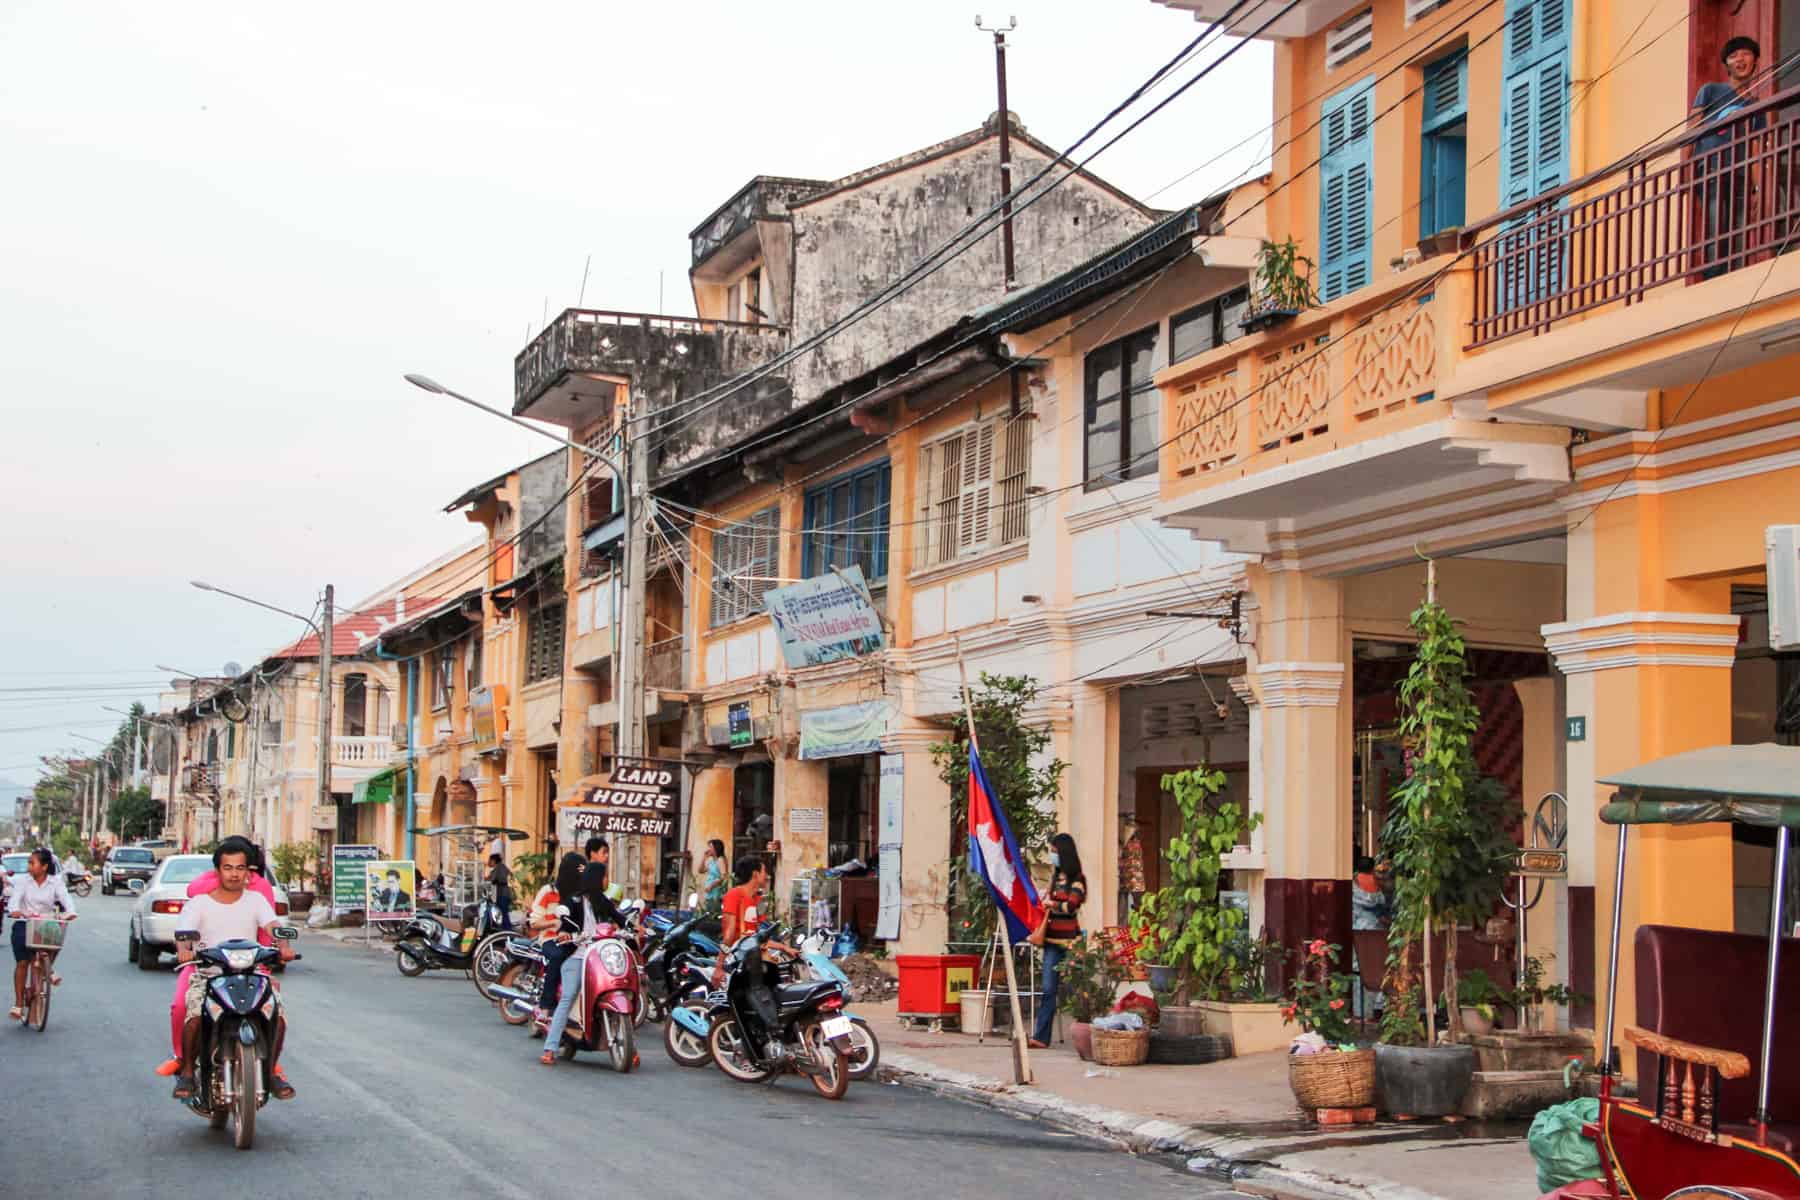 People on motorbikes ride past a row of orange painted houses in French colonial architectural style in Kampot in Cambodia.